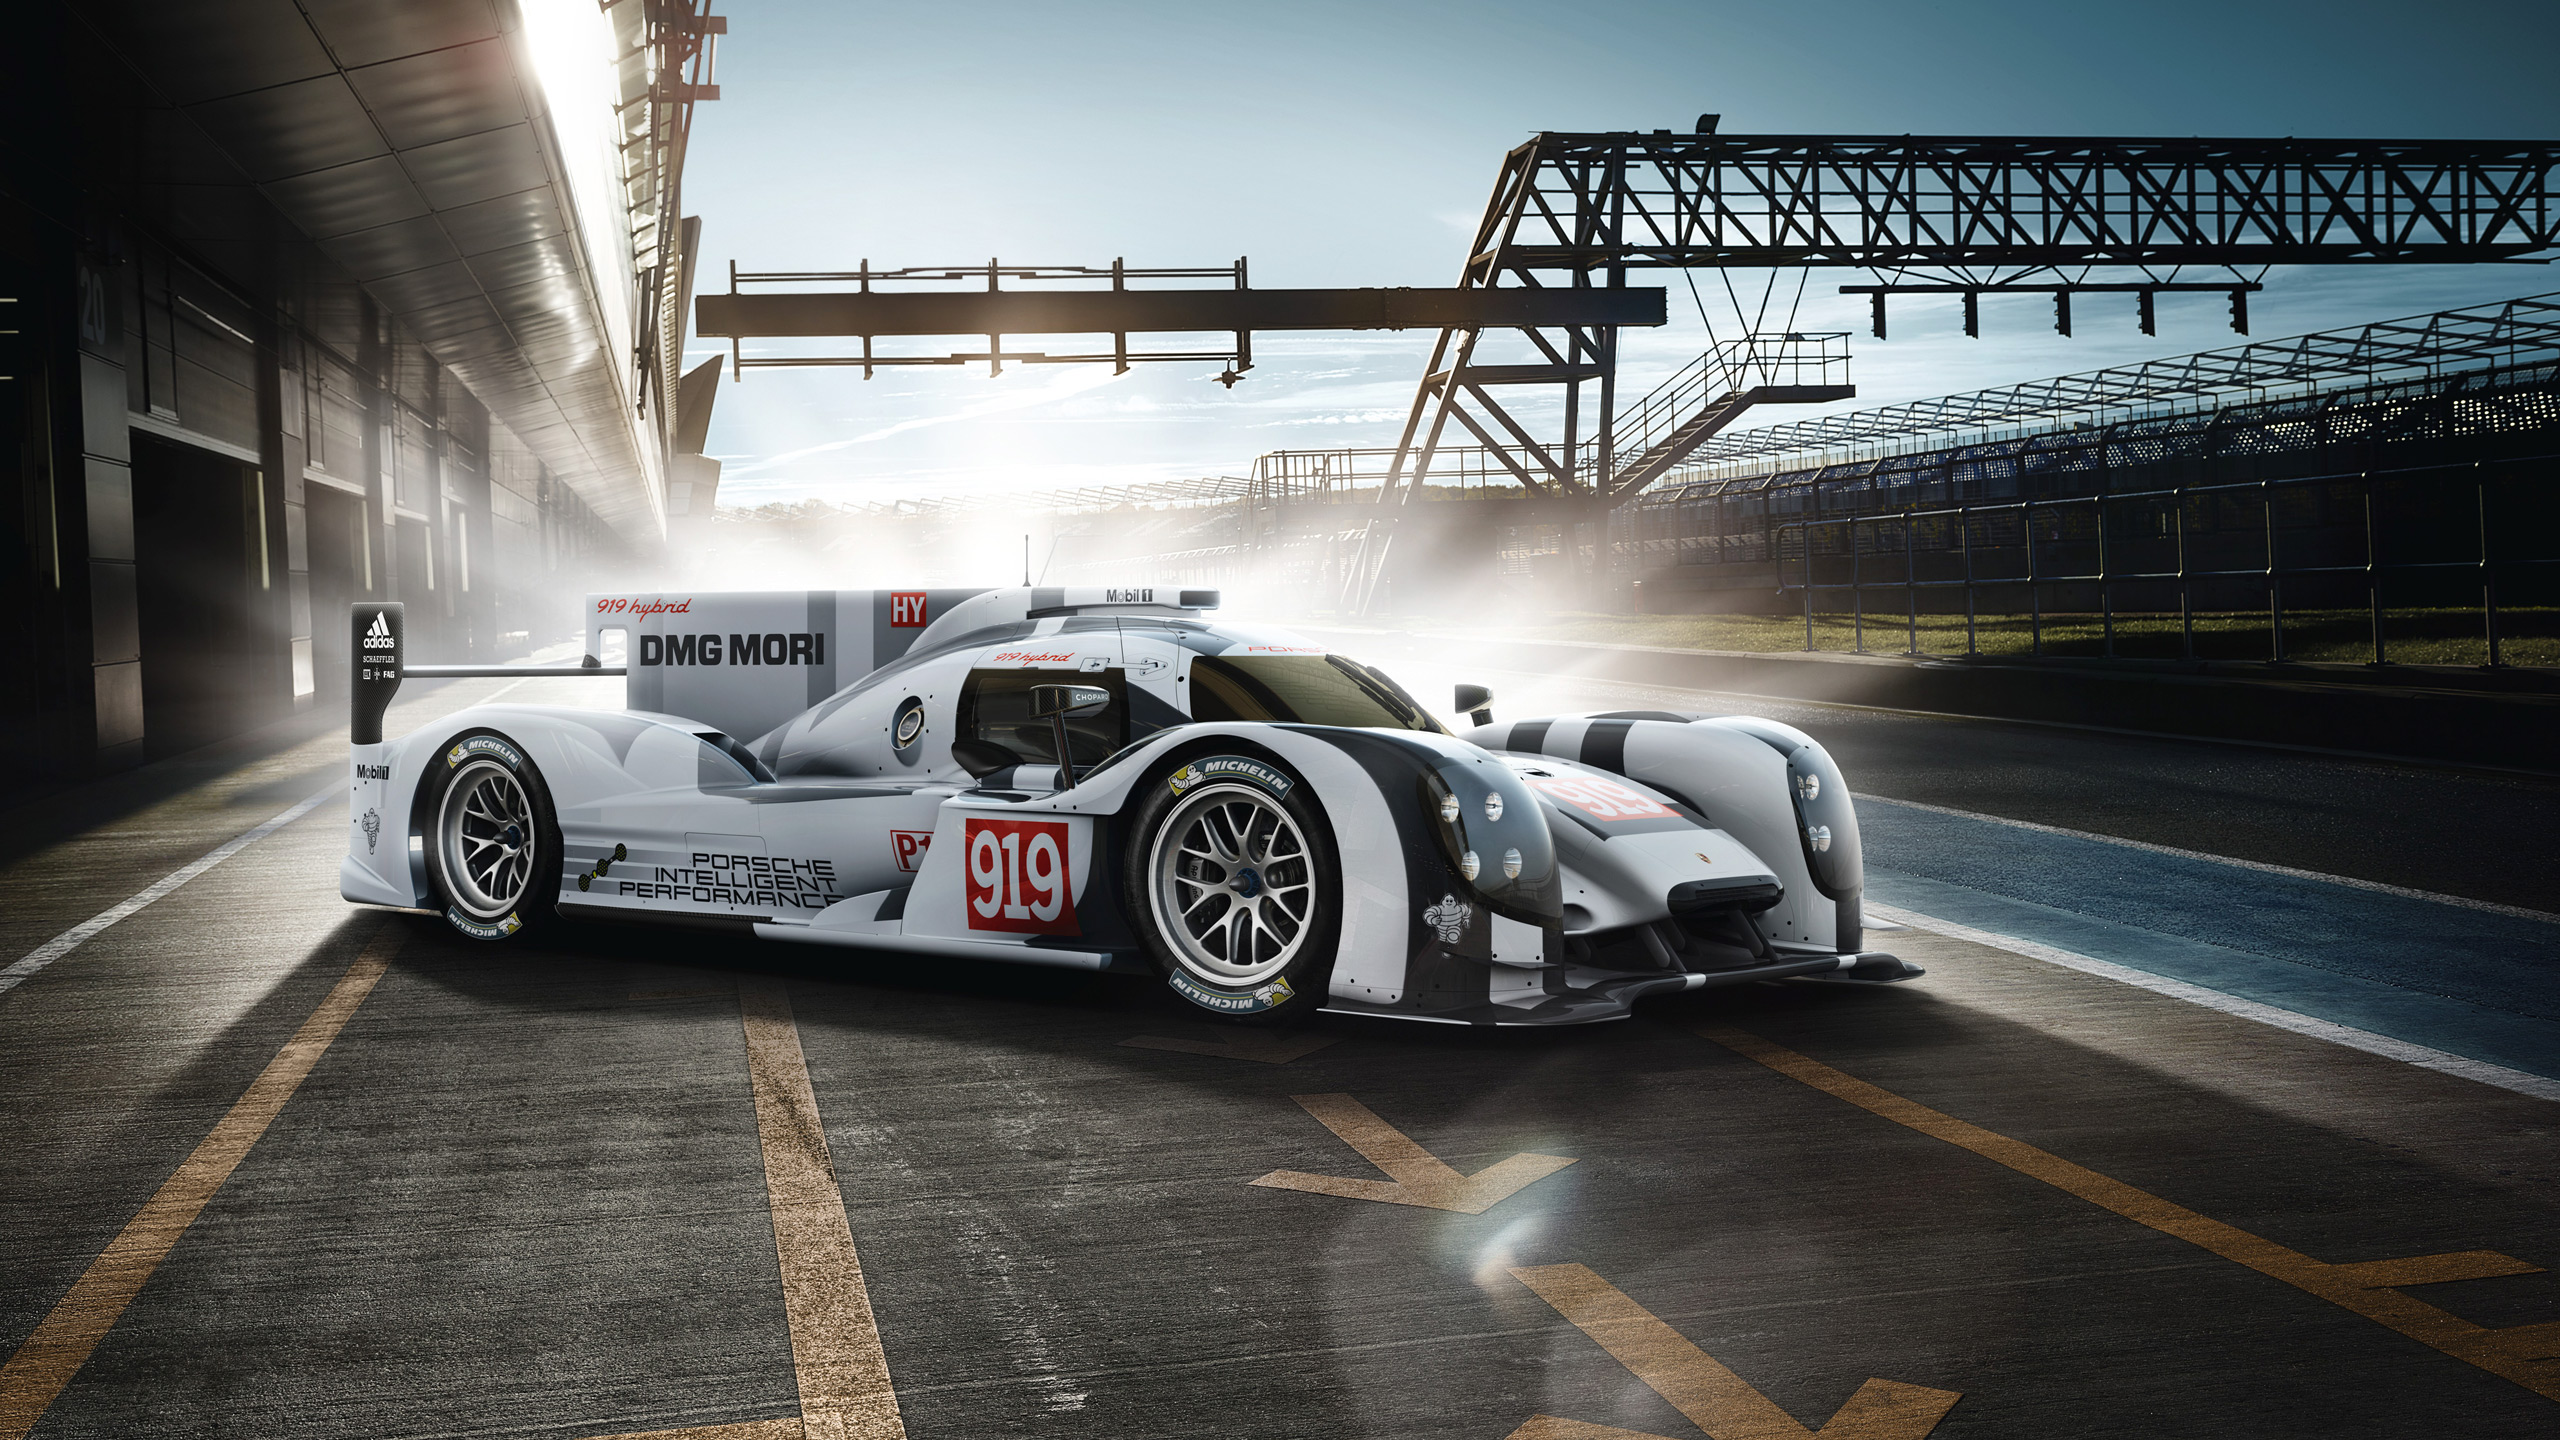 Porsche 919 Hybrid Wallpapers and Background Images   stmednet